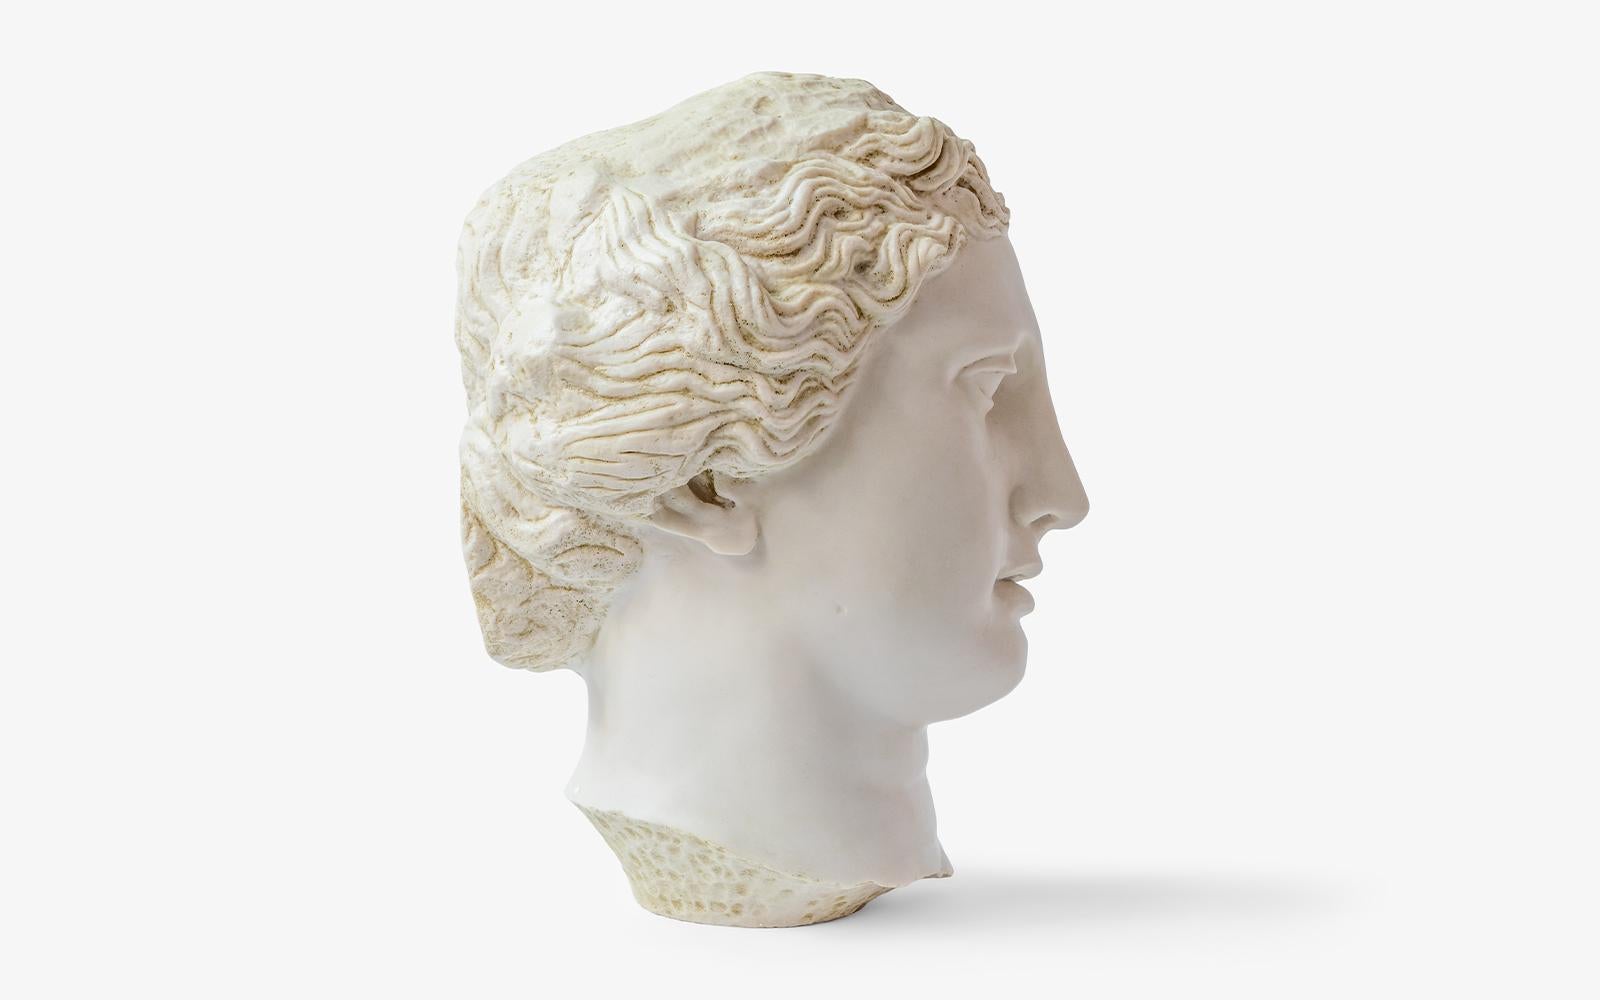 Turkish Apollo Bust Statue Made with Compressed Marble Powder 'Istanbul Museum' For Sale